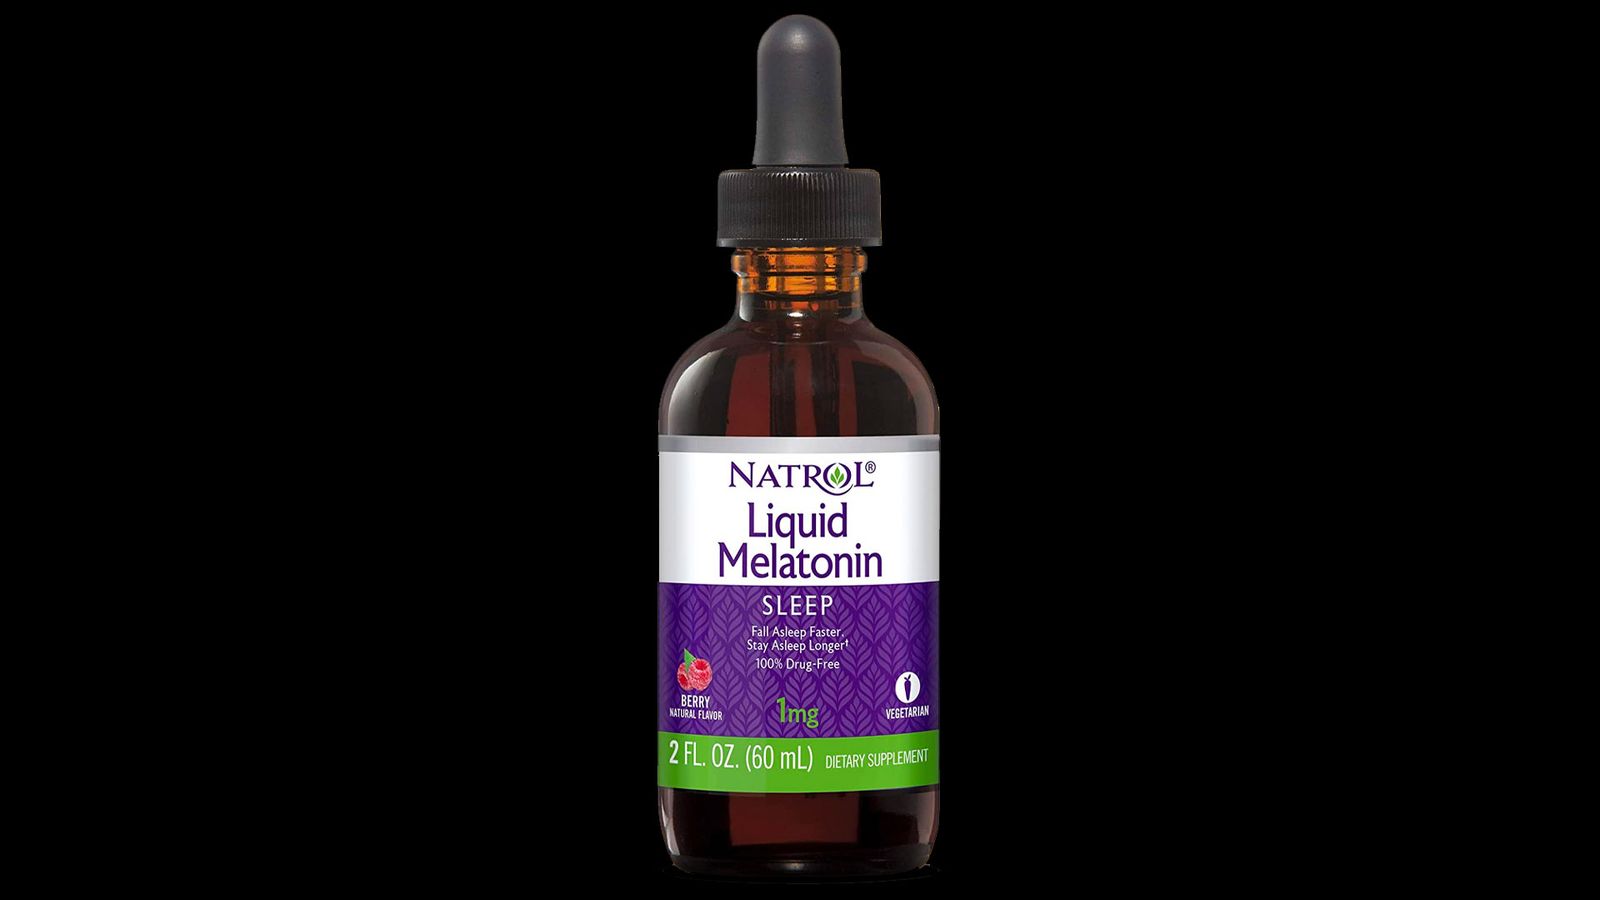 Natrol Liquid Melatonin product image of a brown bottle with a white, purple, and green label.